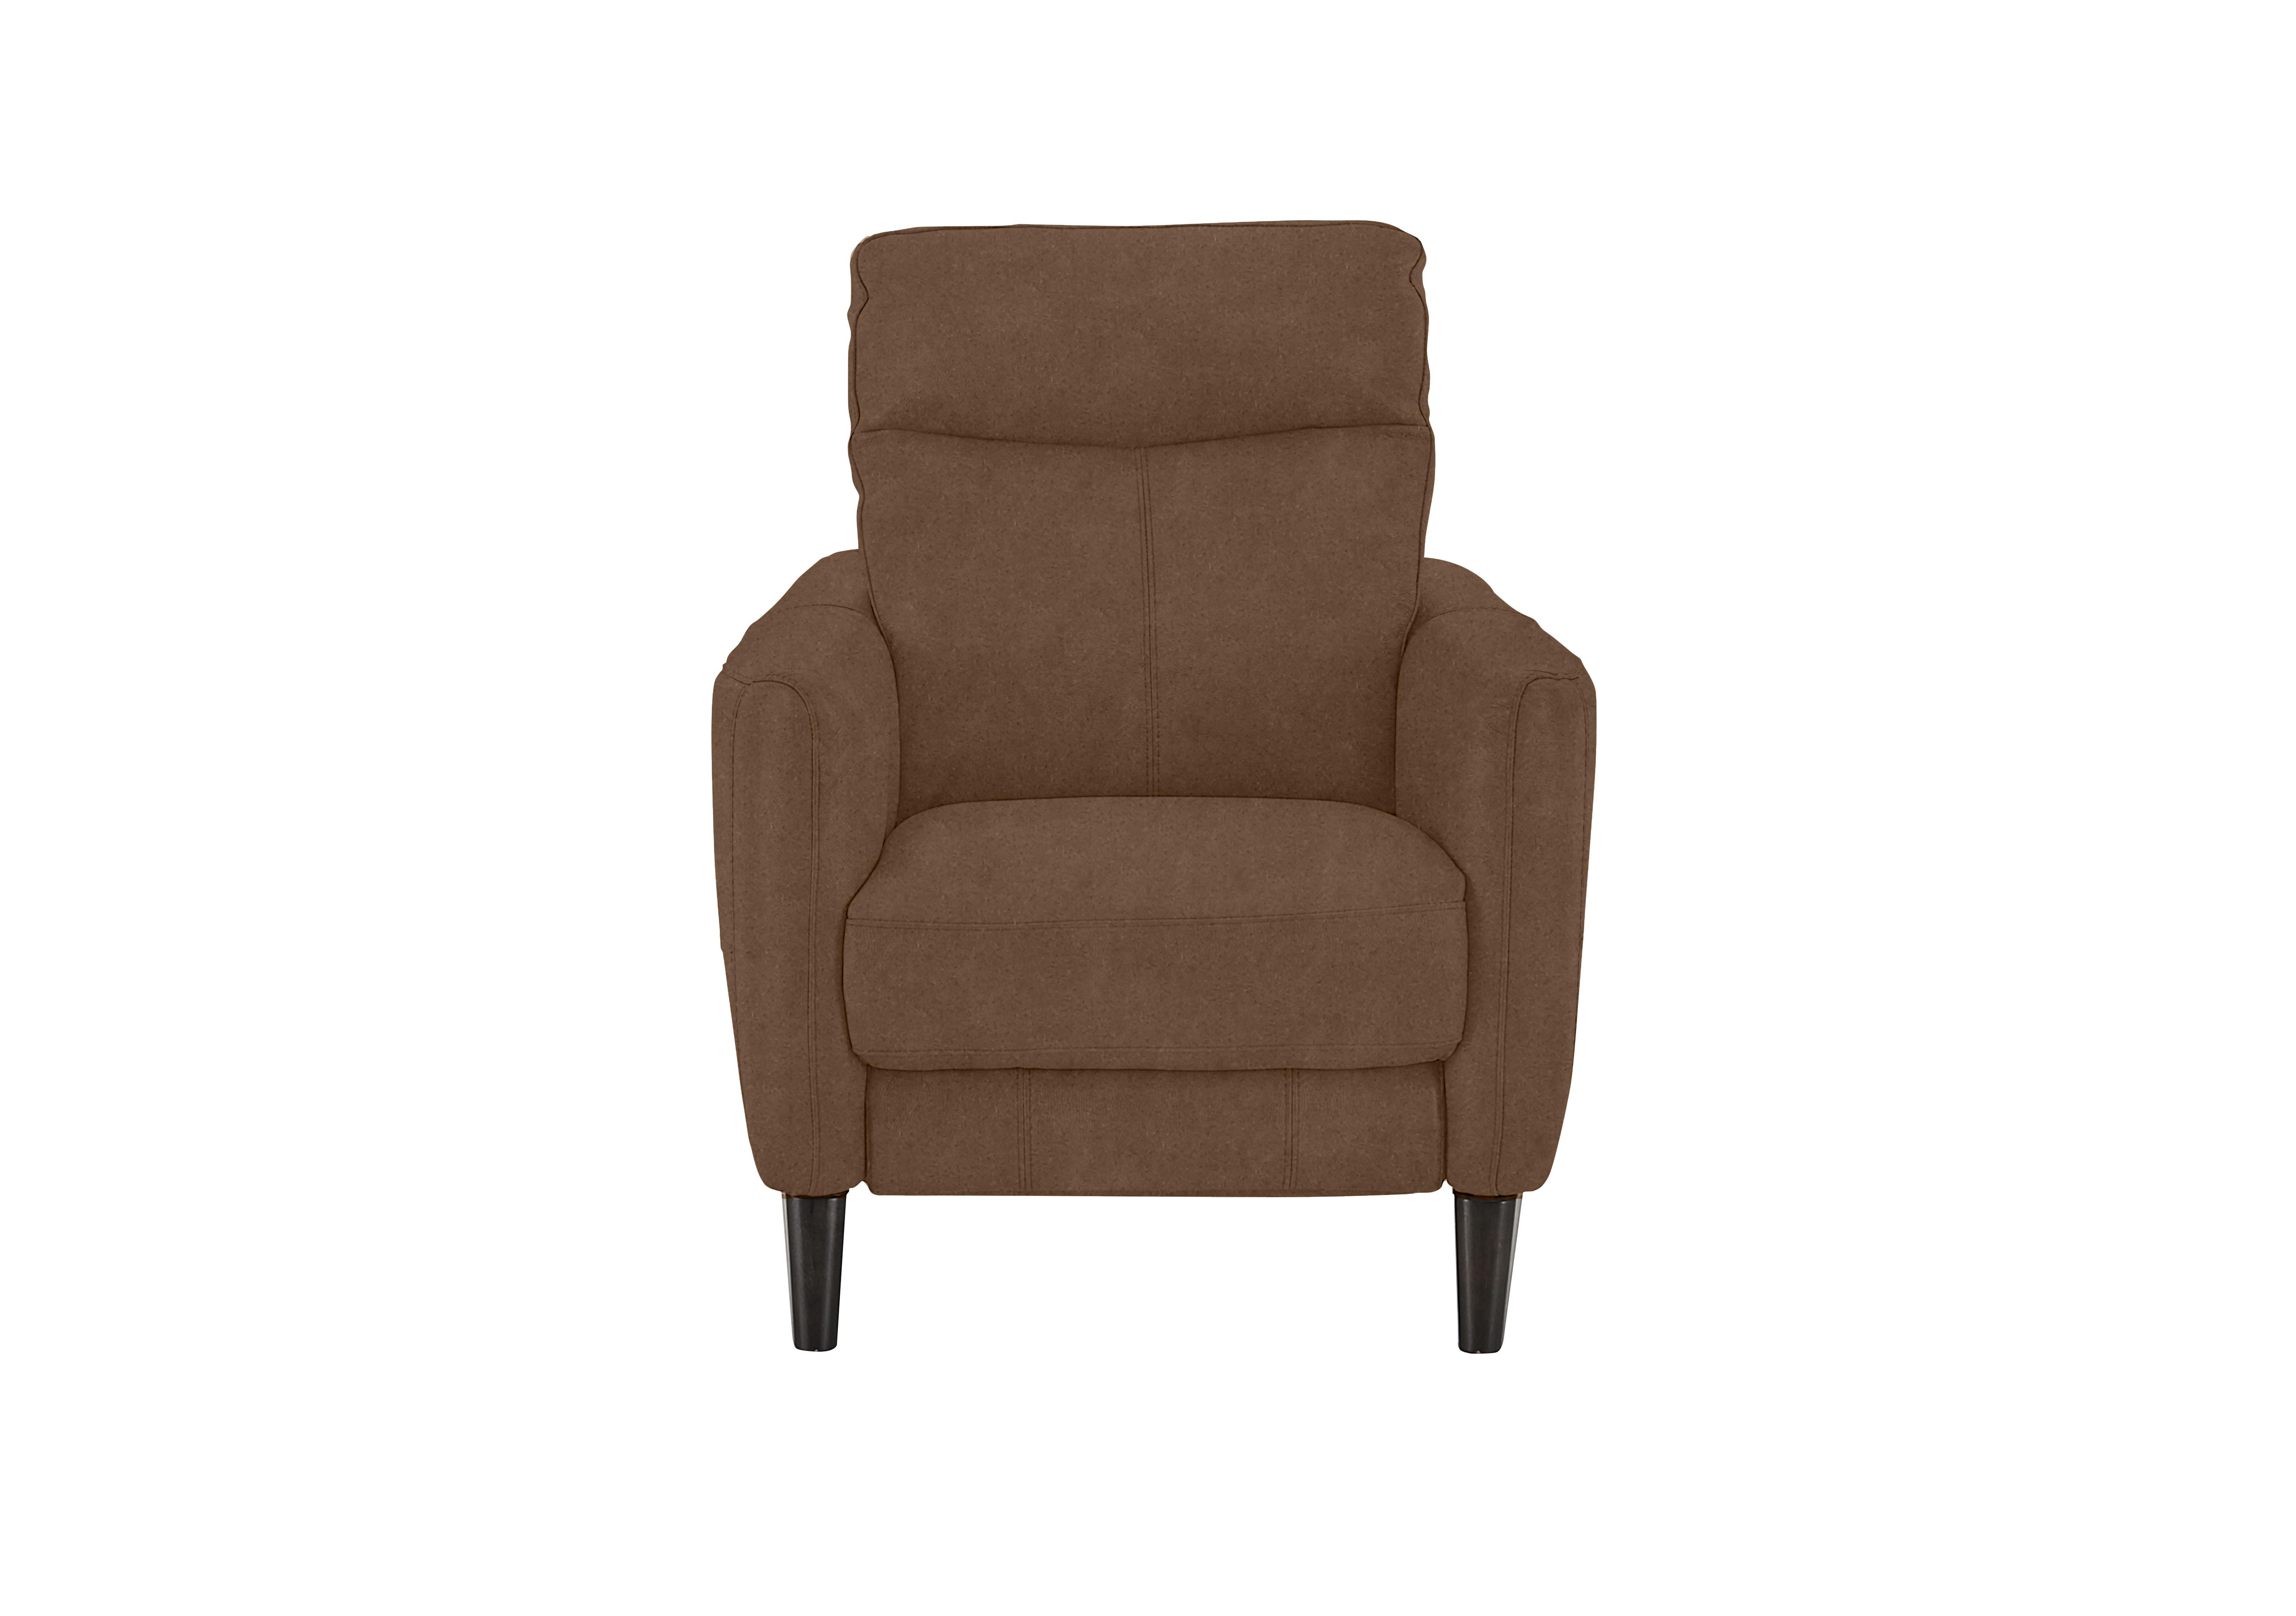 Compact Collection Petit Fabric Armchair in Bfa-Blj-R05 Hazelnut on Furniture Village